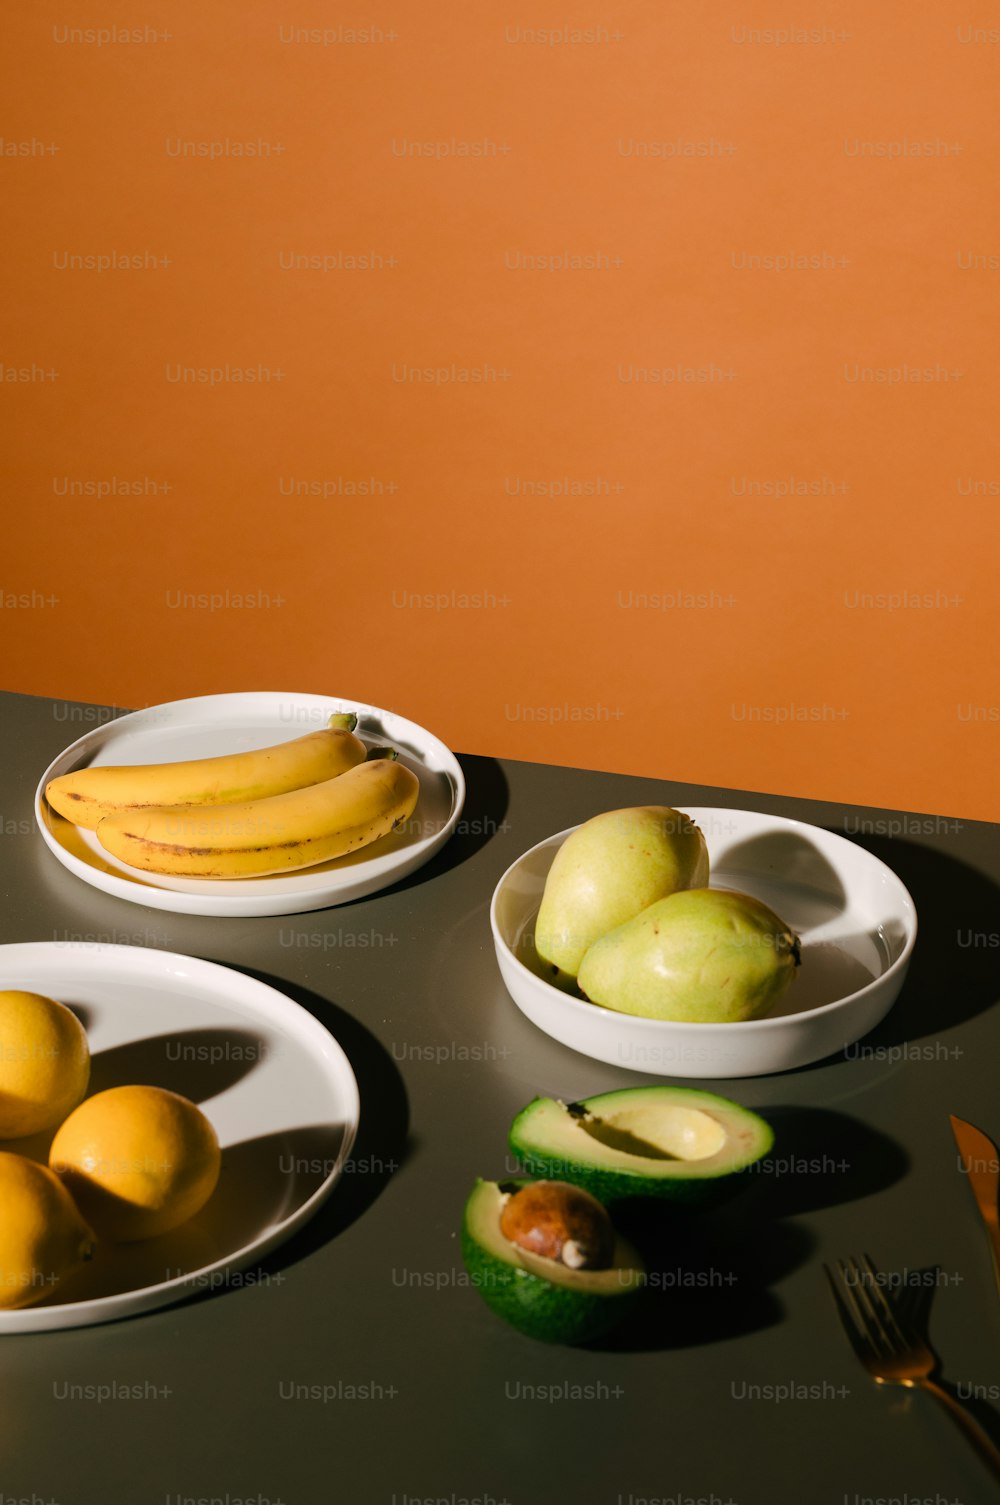 a table topped with plates of fruit and a bowl of bananas